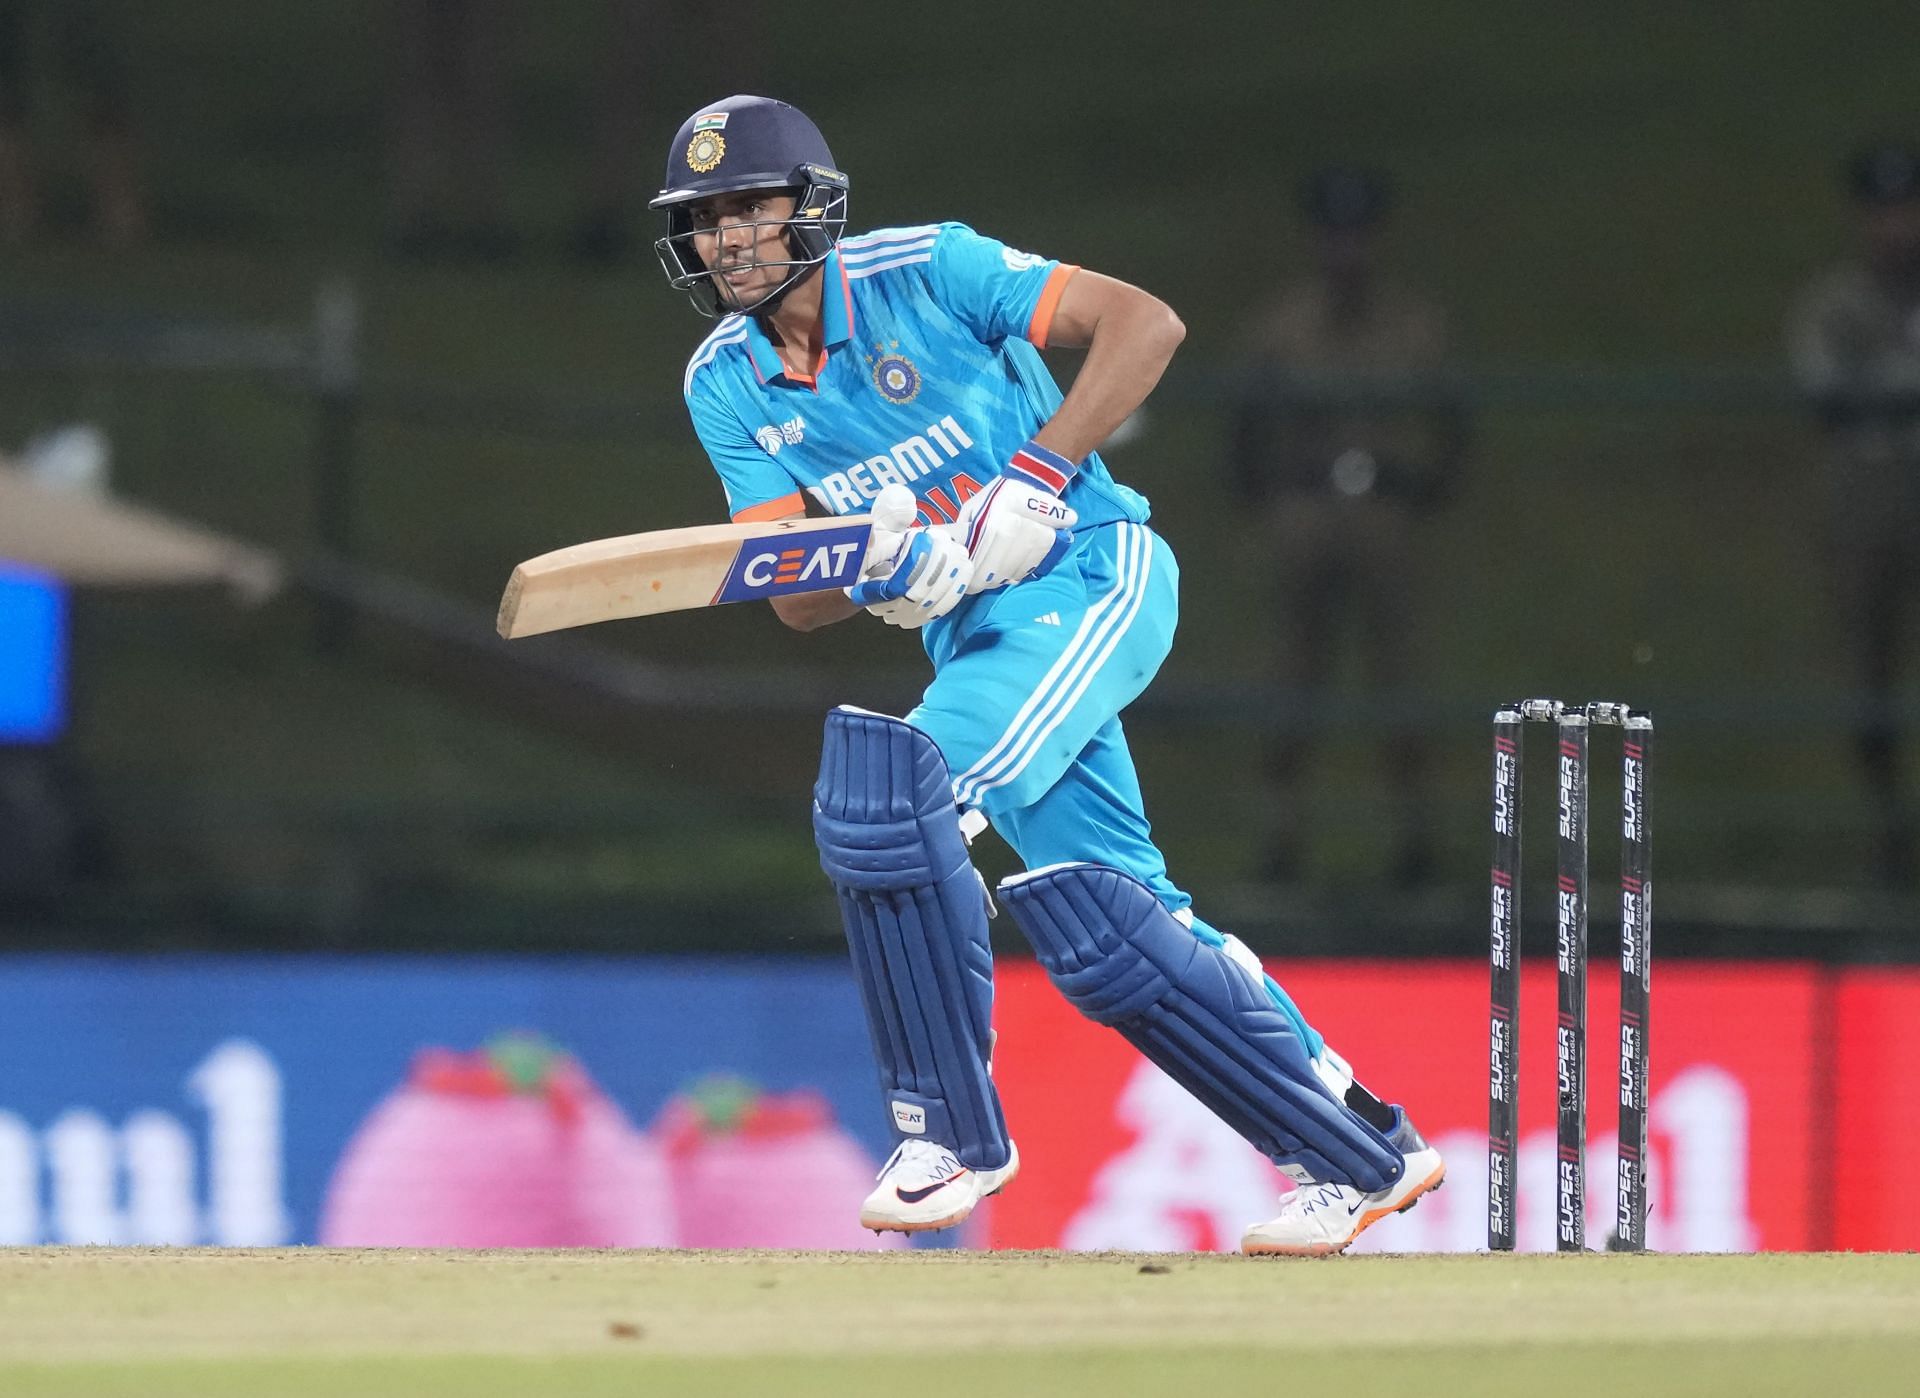 Shubman Gill remained unbeaten in the chase